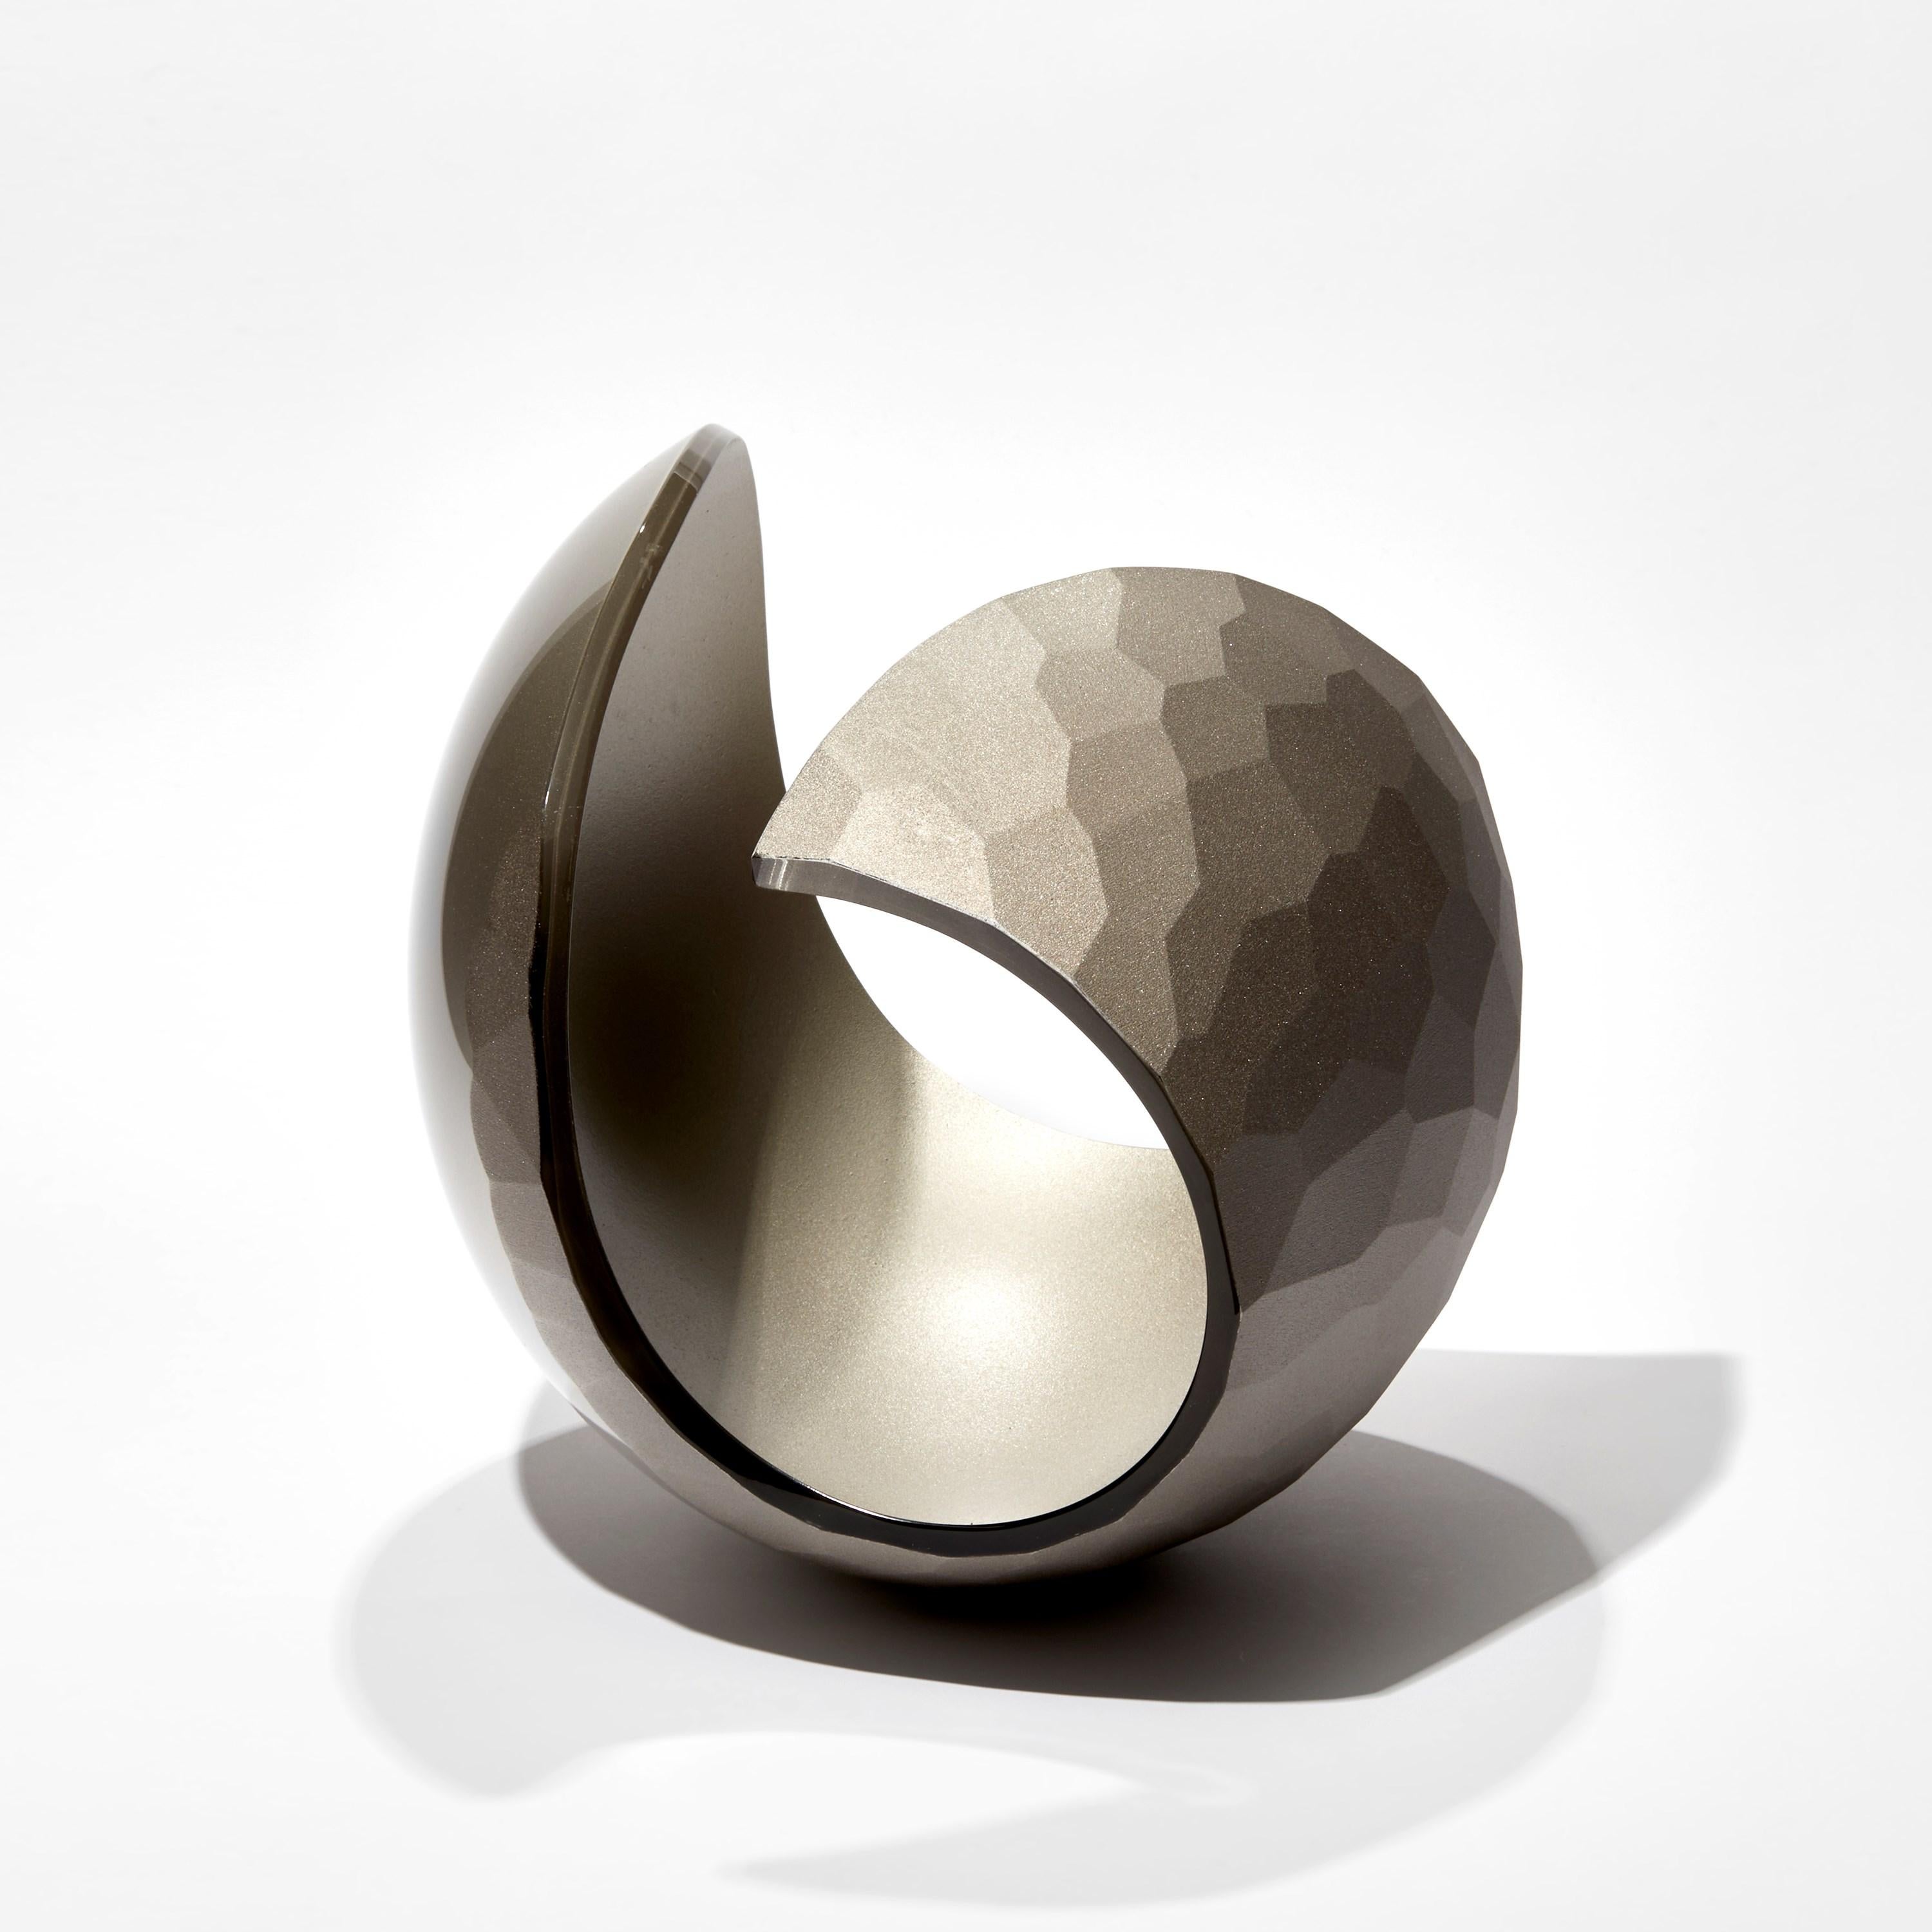 Hand-Crafted Facetted Bronze Planet, a Cut Glass Centrepiece / Sculpture by Lena Bergström For Sale